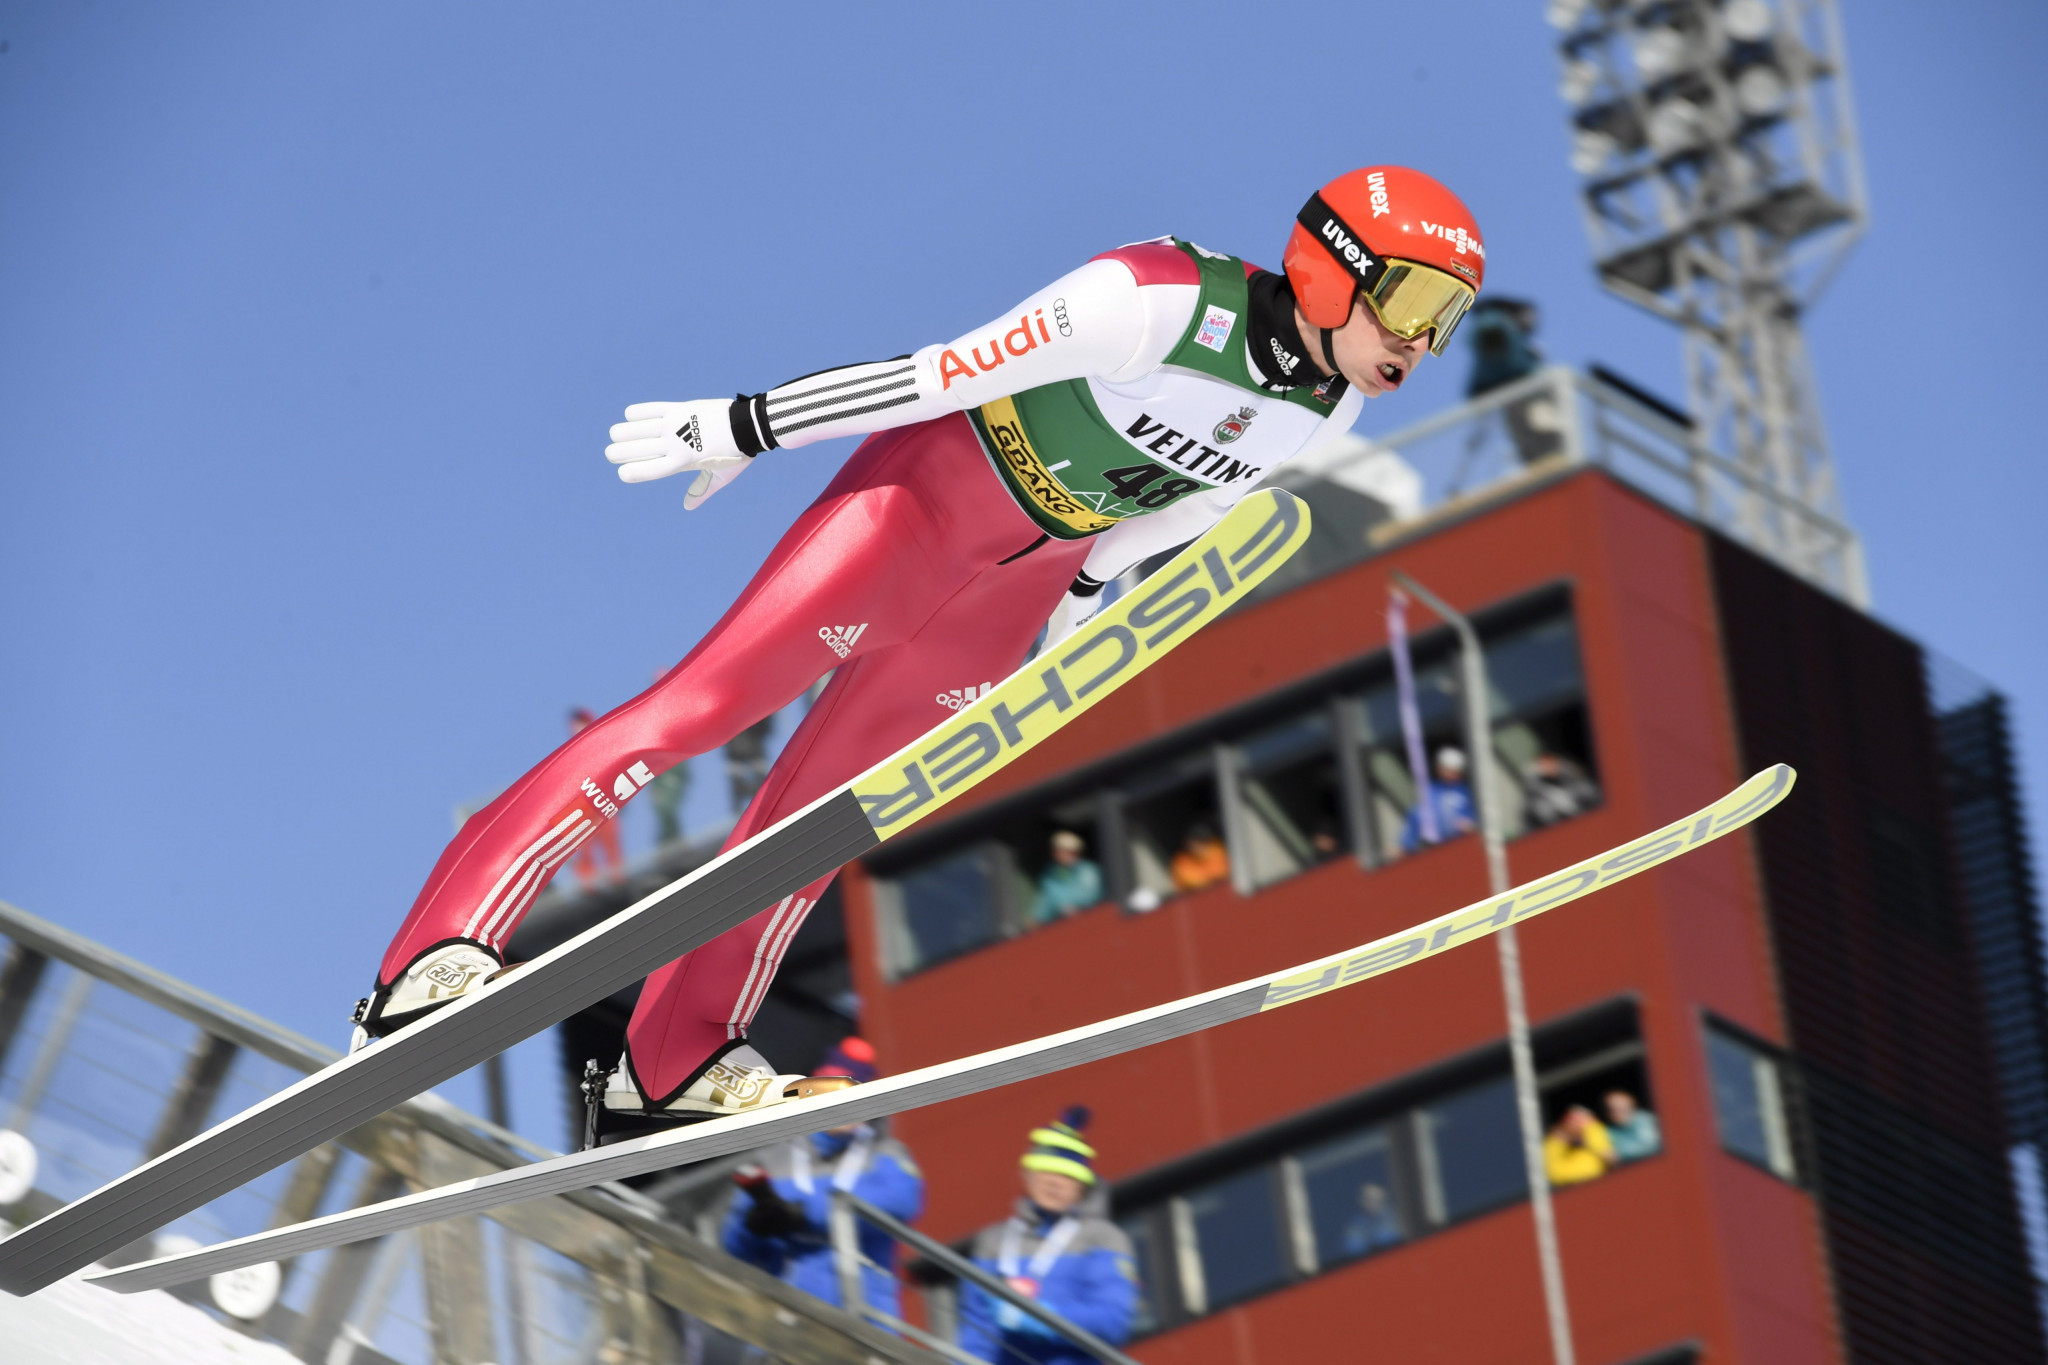 Frenzel targeting a big chunk of silverware at FIS Nordic Combined World Cup Final on home snow